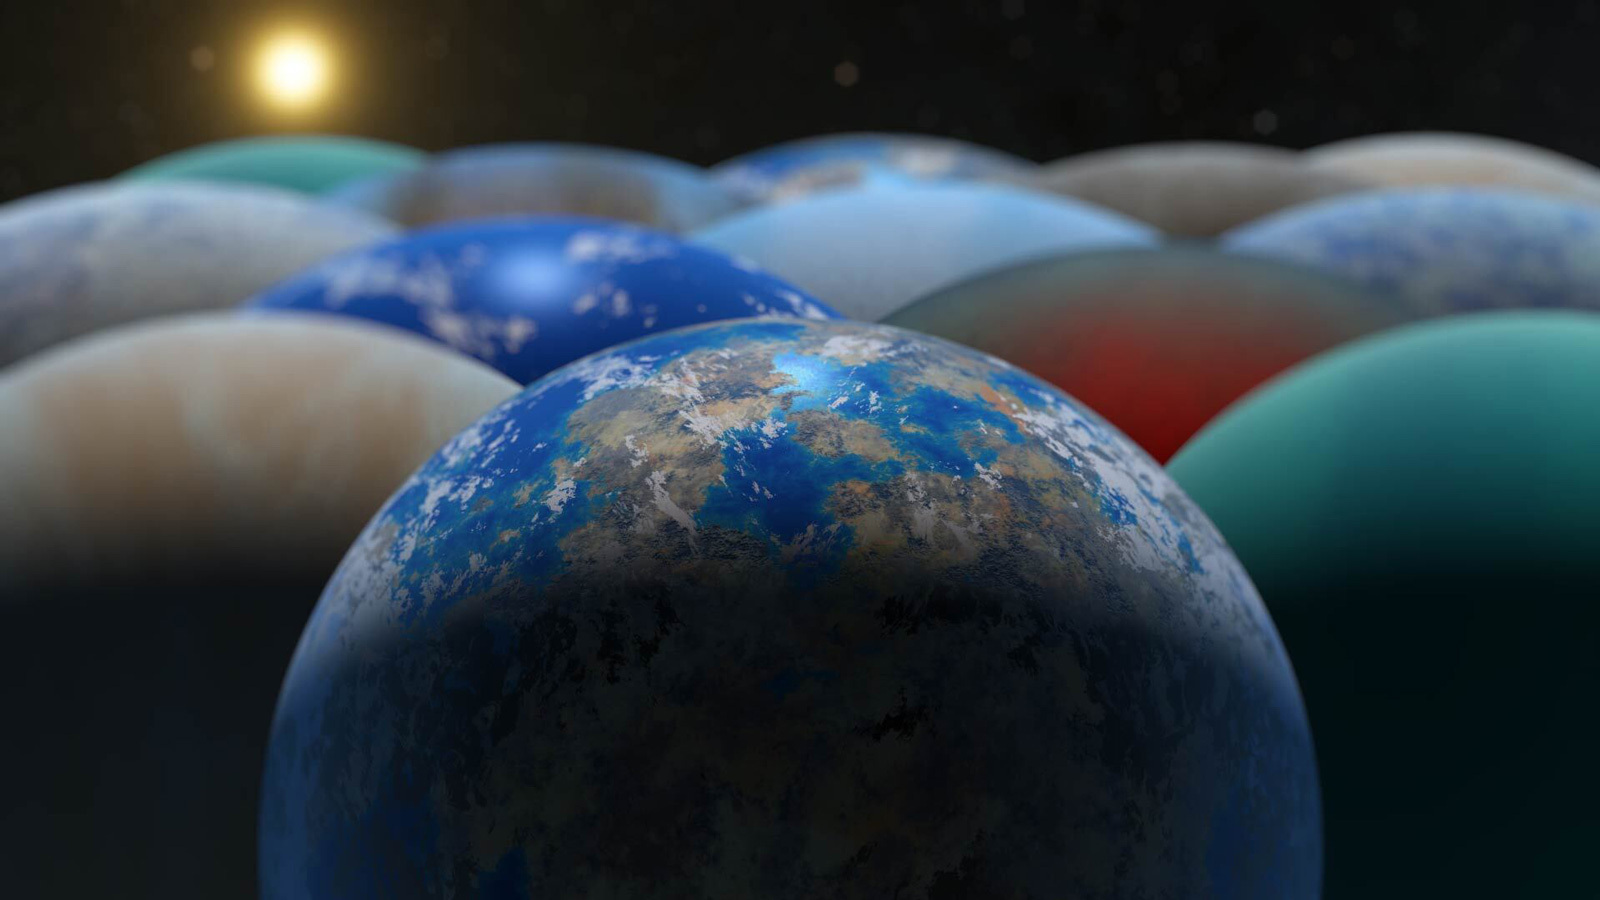 An artist's illustration shows many different exoplanets in many colors grouped together with a distant star behind them. They look like colorful pool balls gathered in space.